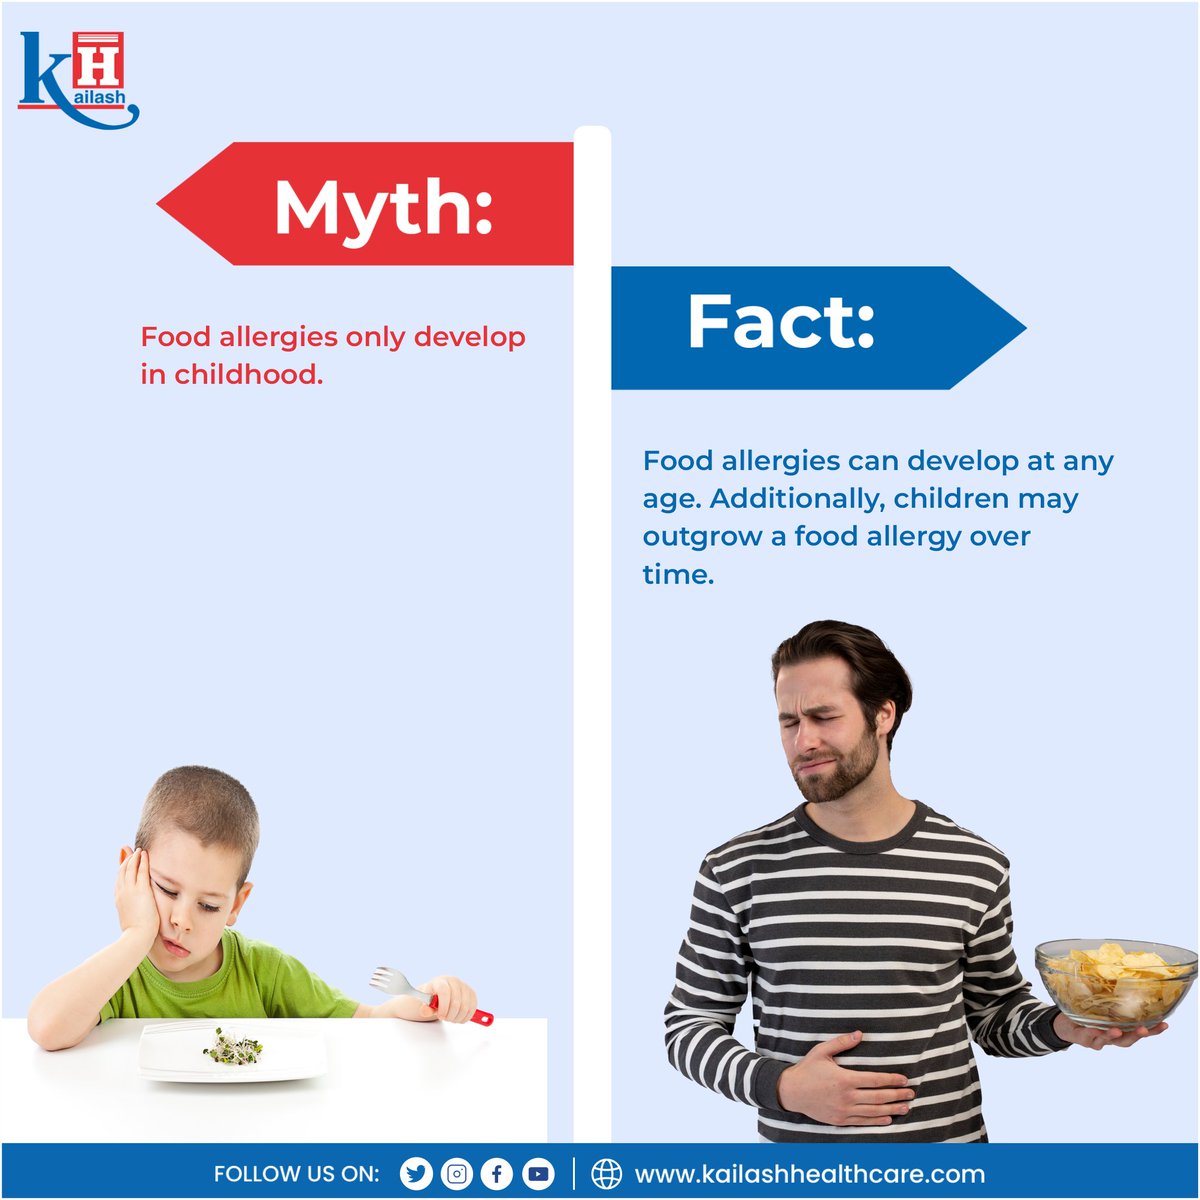 Do food allergies only happen in childhood? Here’s something you should know!
#AllergyMyth #FoodAllergies #MythFact #AllergyAwareness #ChildhoodAllergies #FoodAllergyFacts